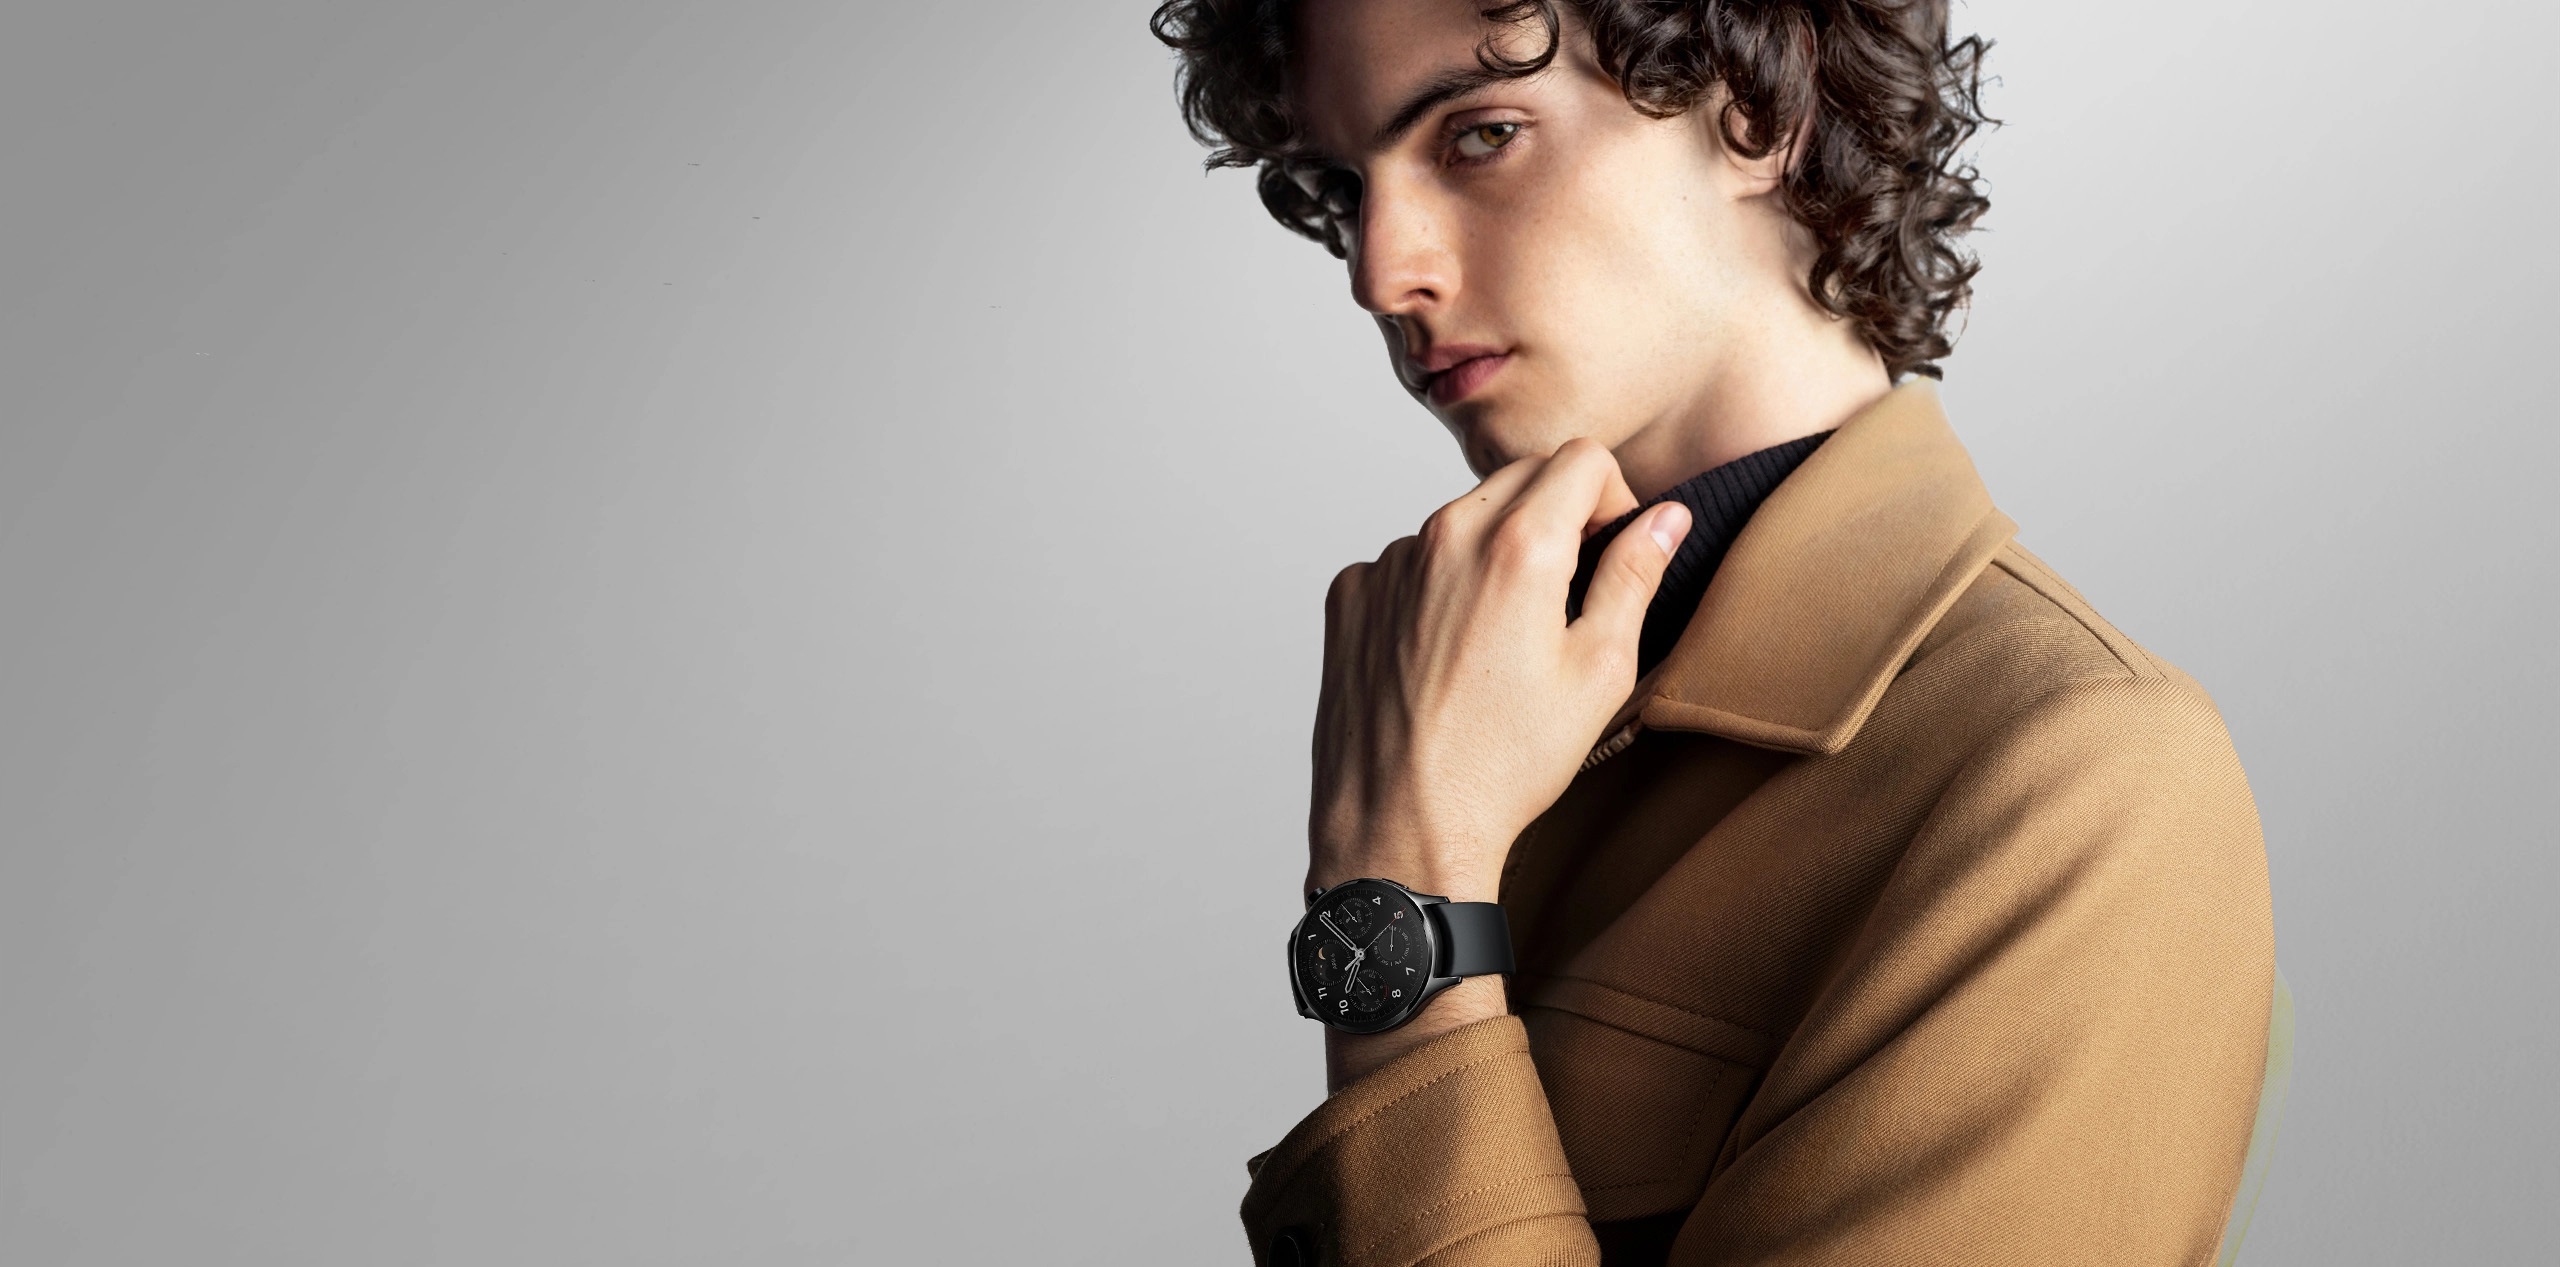 Xiaomi Watch S1 Pro: smartwatch with body temperature sensor, classic design and 2 weeks of battery life for $220